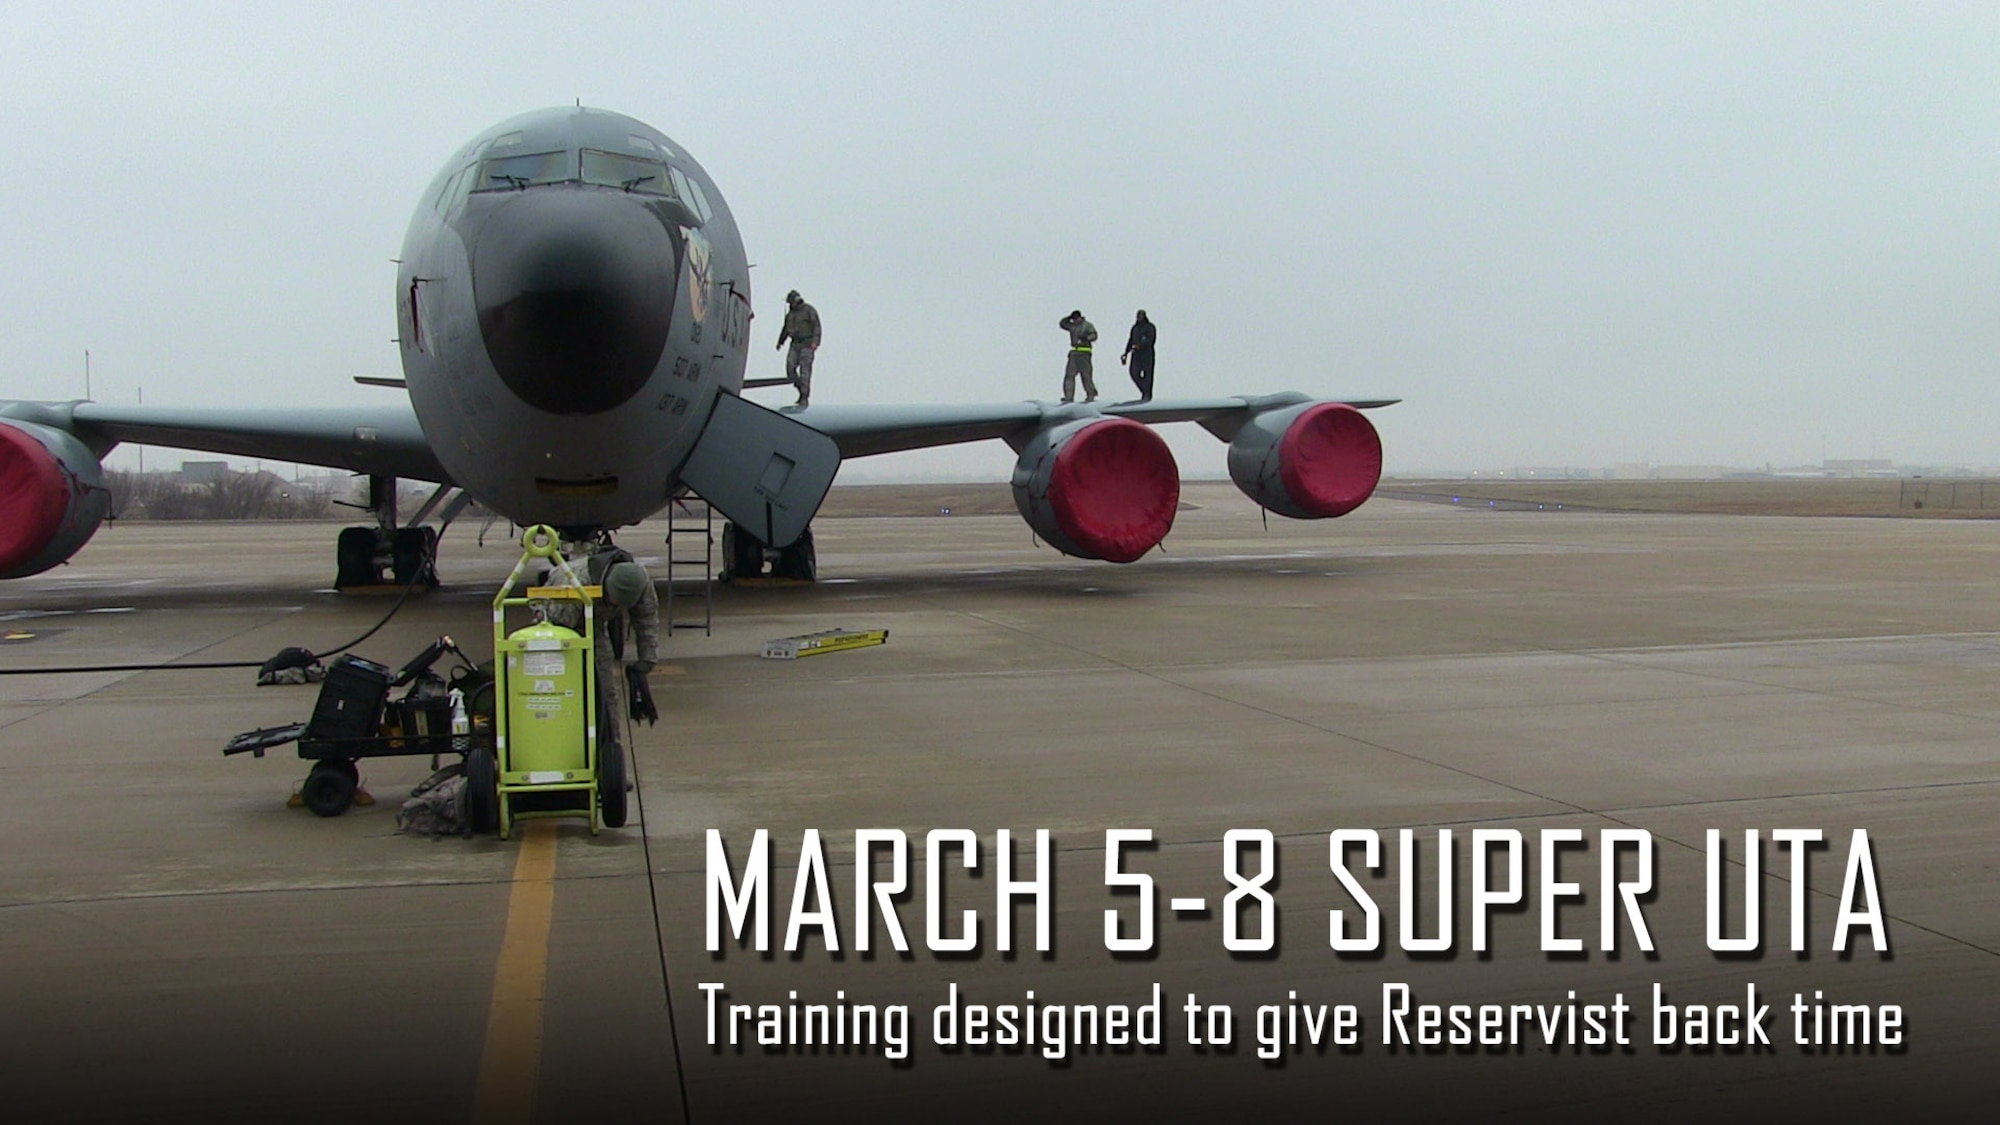 The 507th Air Refueling Wing is holding its first Super Unit Training Assembly on March 5-8 to give time back to Reservists. 
